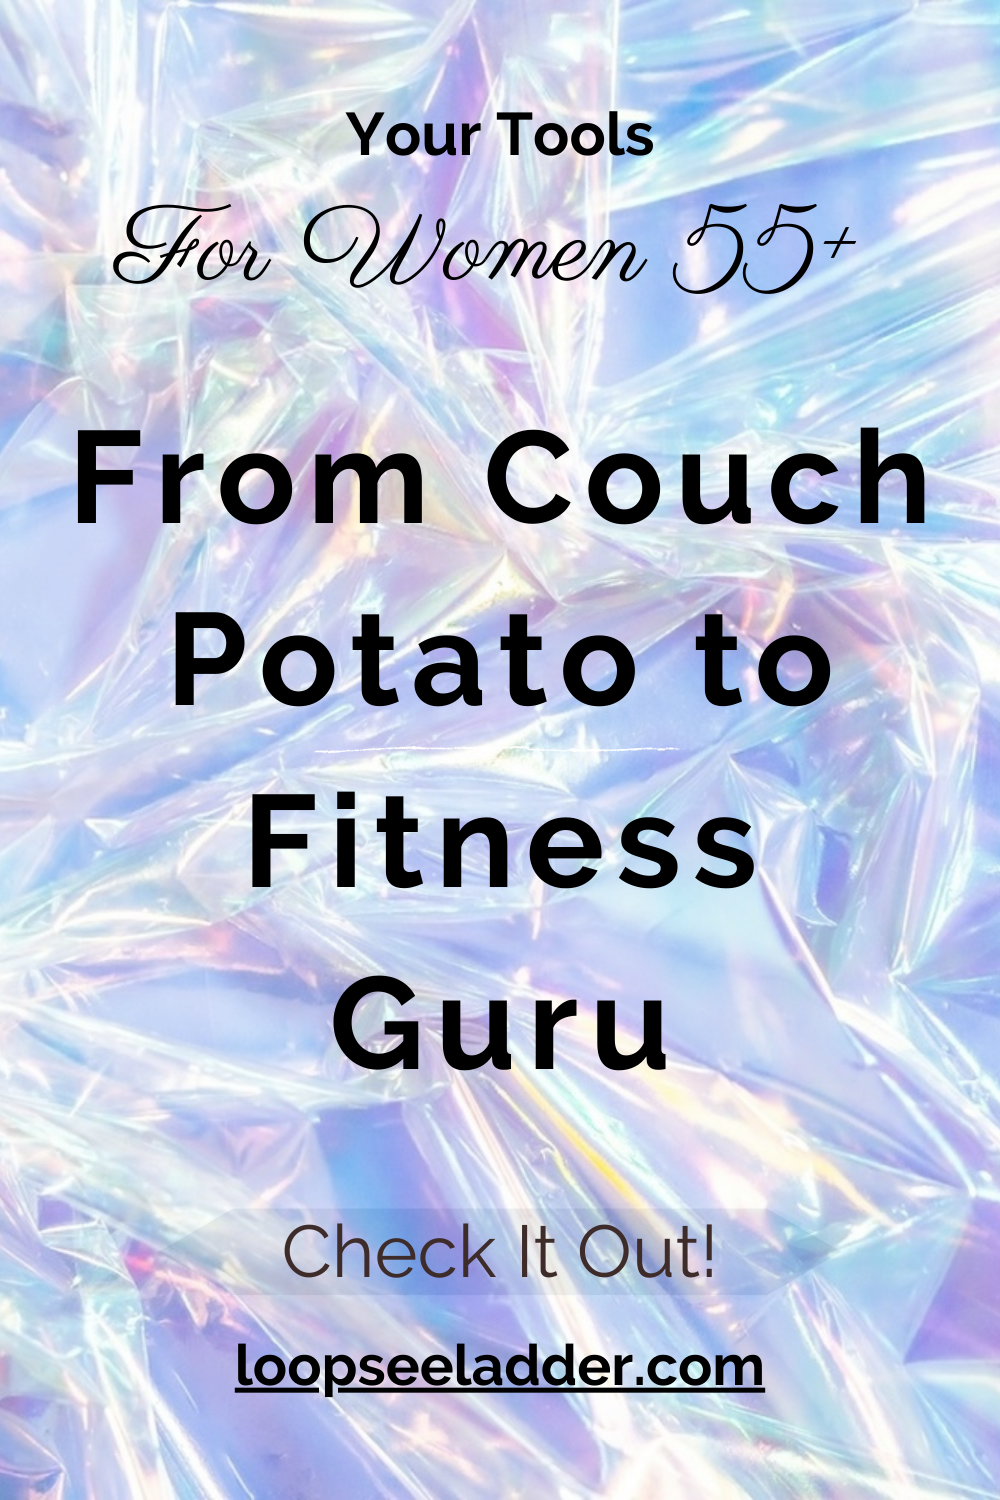 From Couch Potato to Fitness Guru: How Women 55+ Can Transform Their Lives